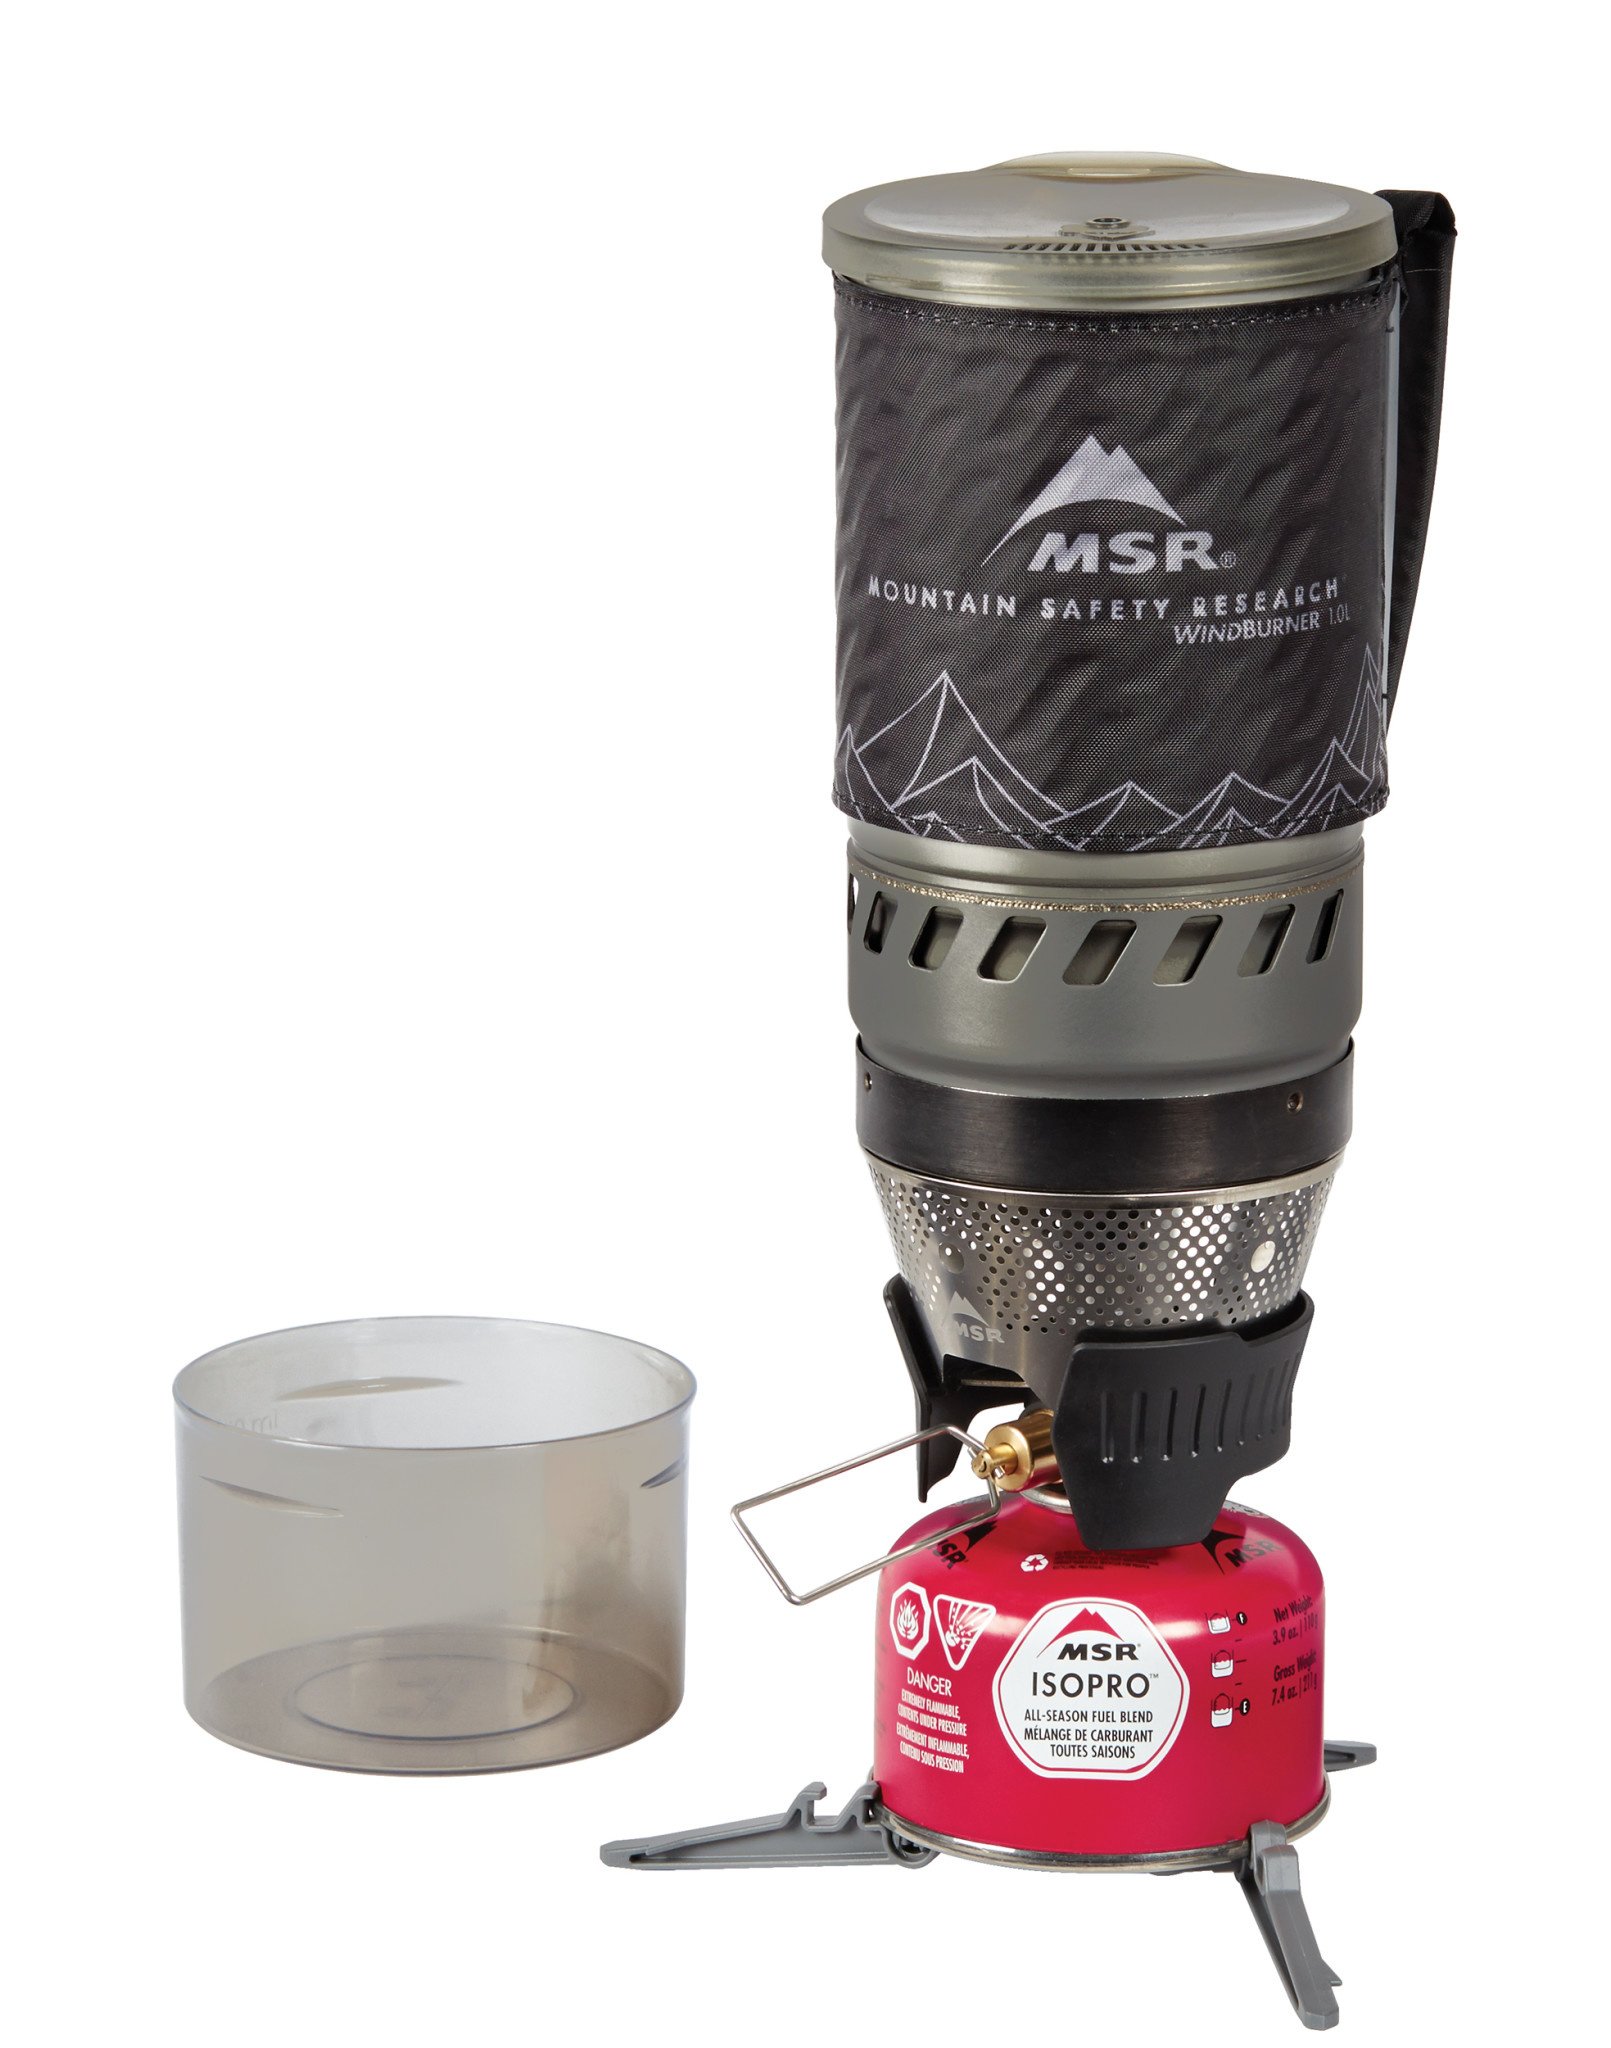 MSR WindBurner Personal Stove System | The BackCountry in Truckee, CA